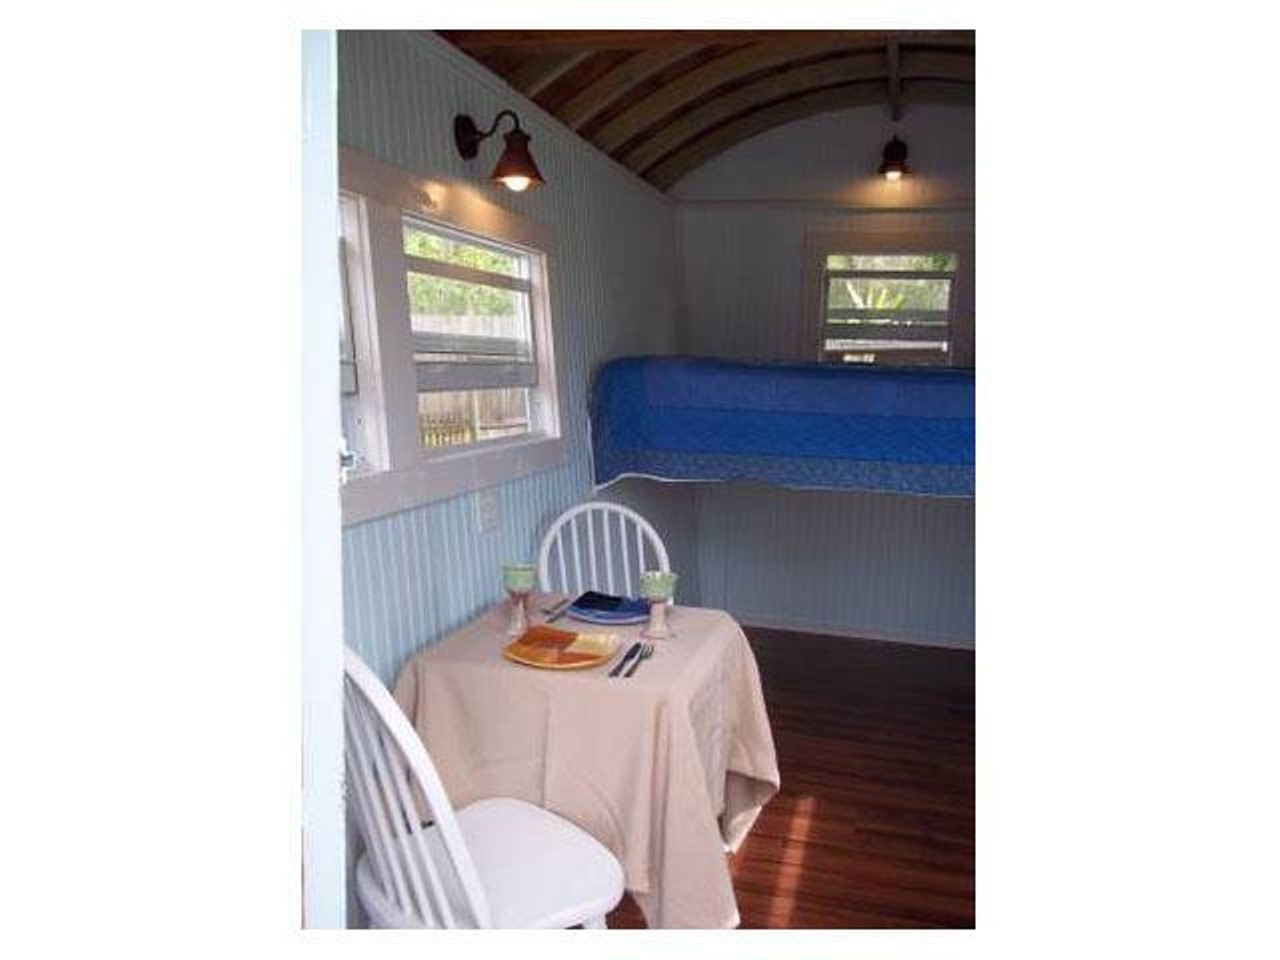 Ocean-themed Gypsy Wagon
Location: Englewood
Price: $8000
Size: 98 sq ft
Those hardwoods floors look great!